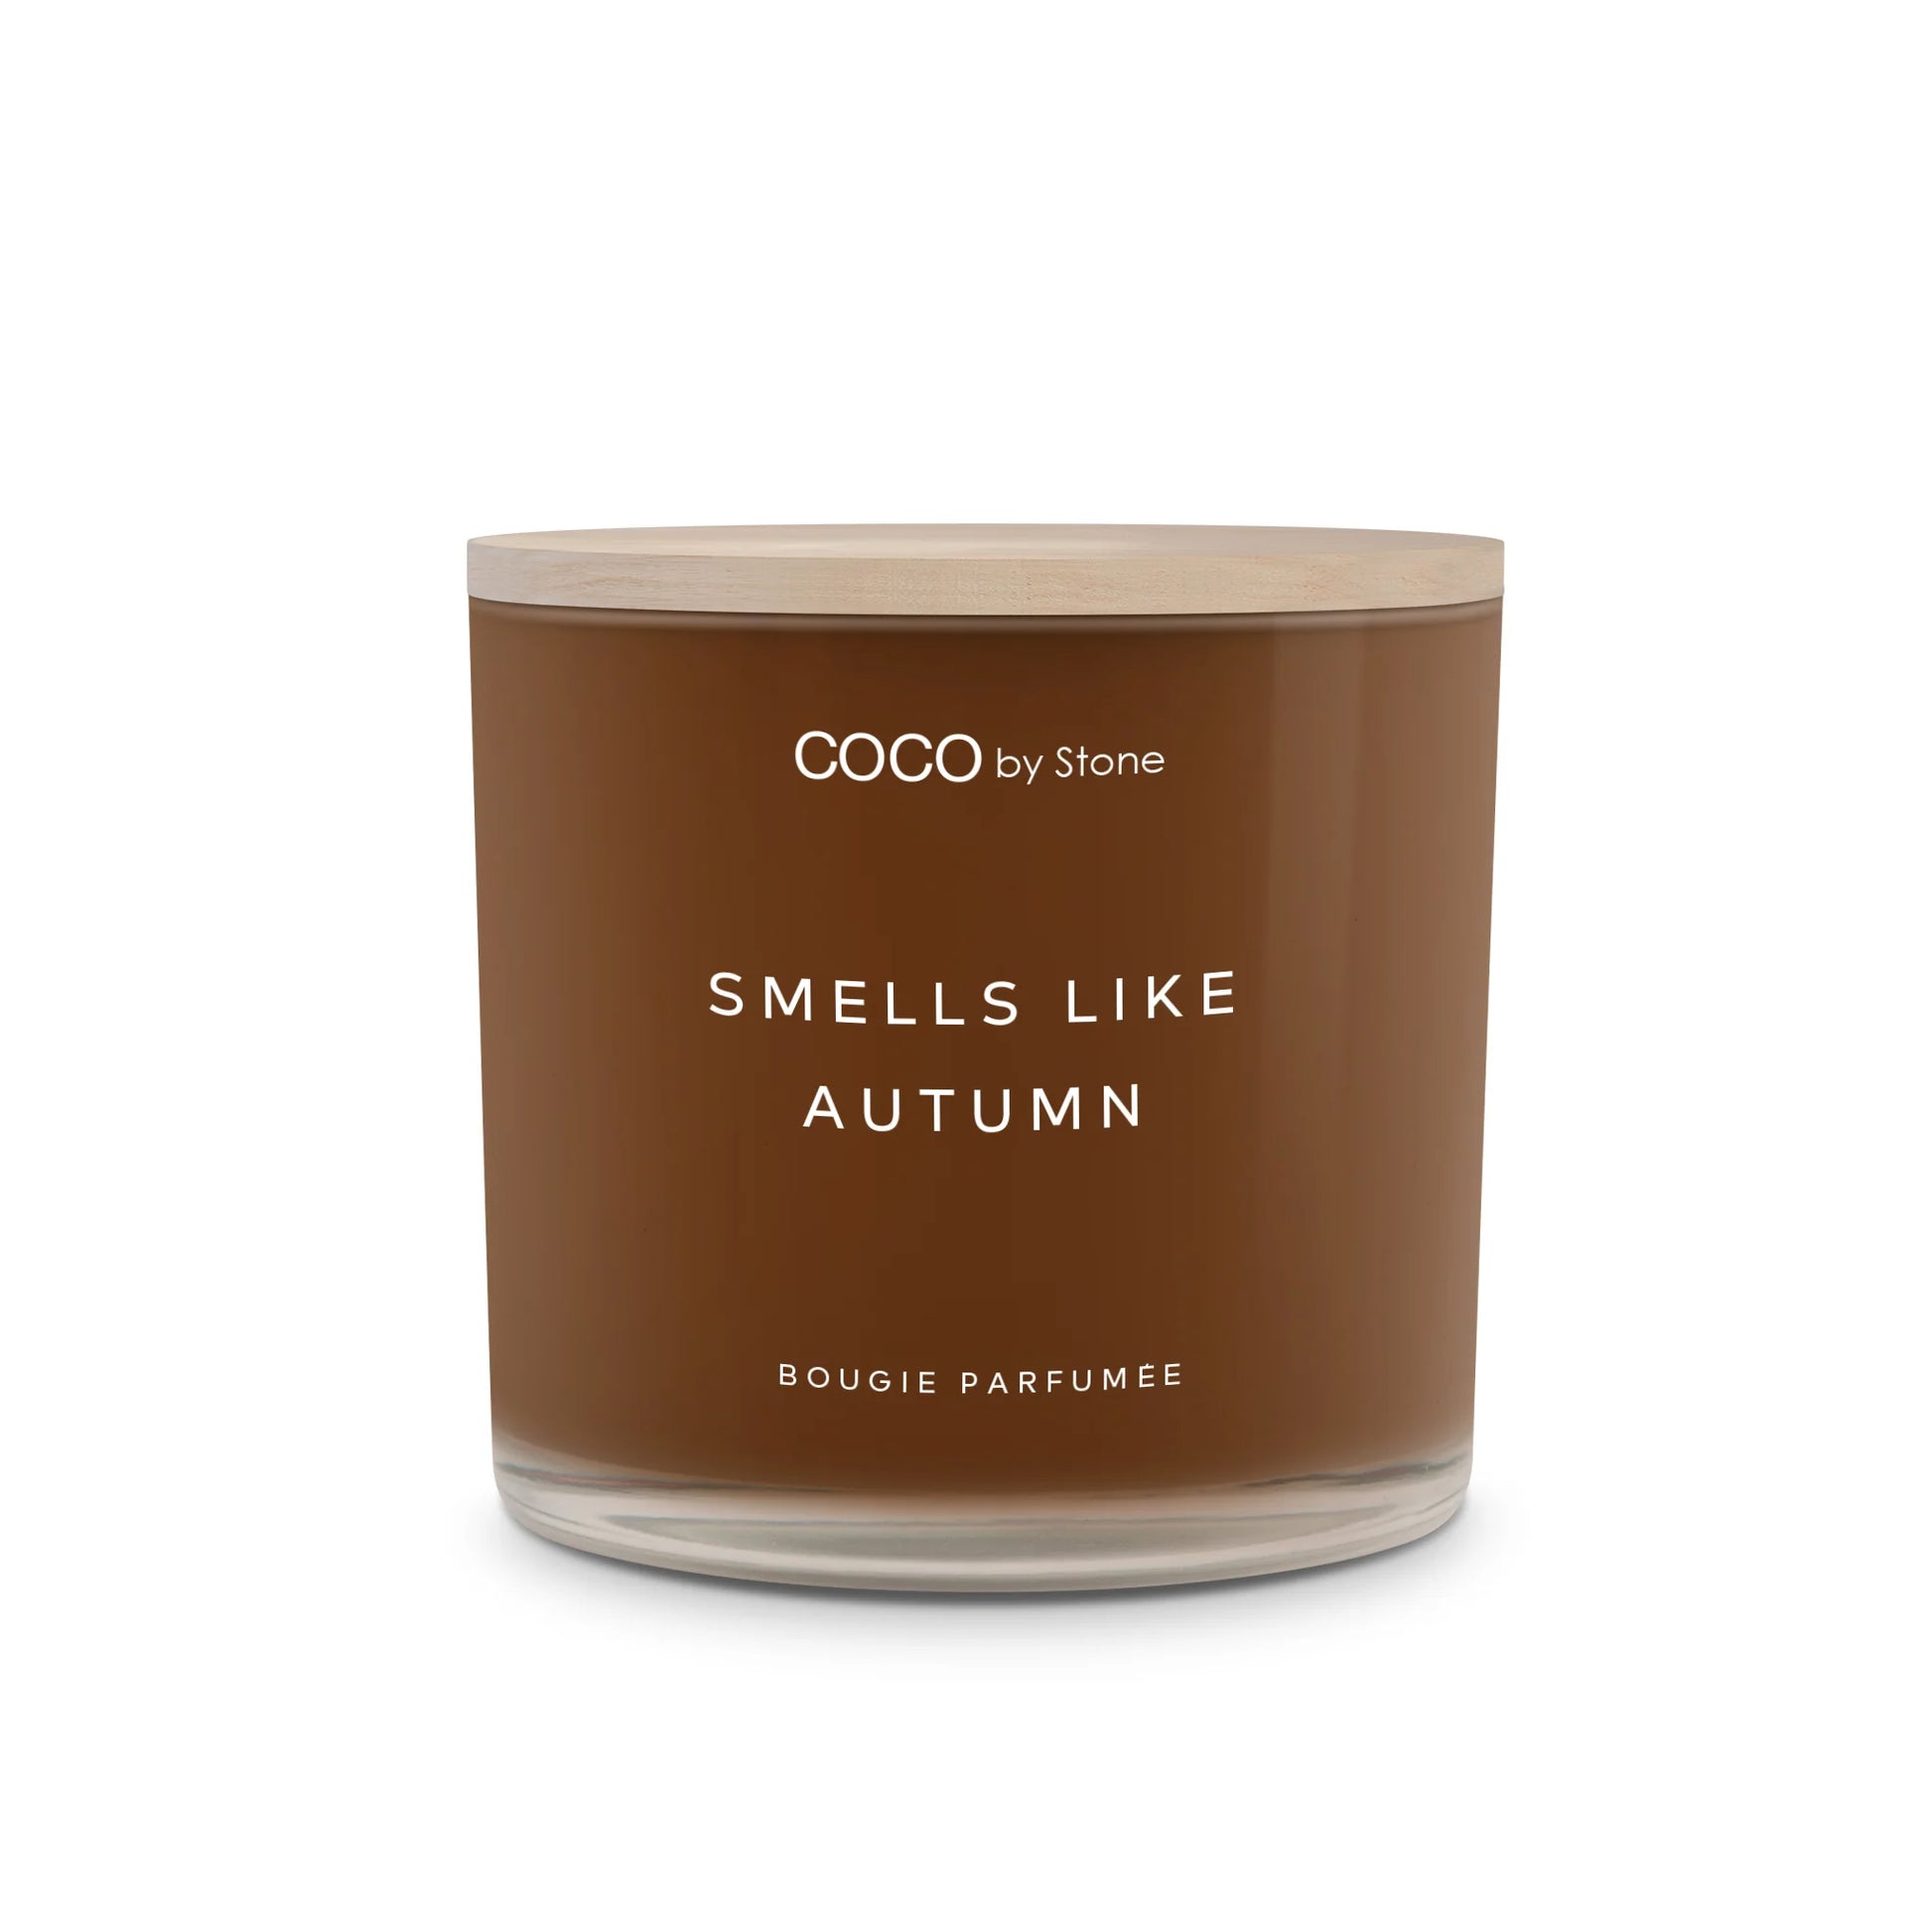 Broluxe Ltd. Co. XL American Bully COCO by Stone Autumn - Pet Safe Coconut Wax Candle - Food Grade Certified